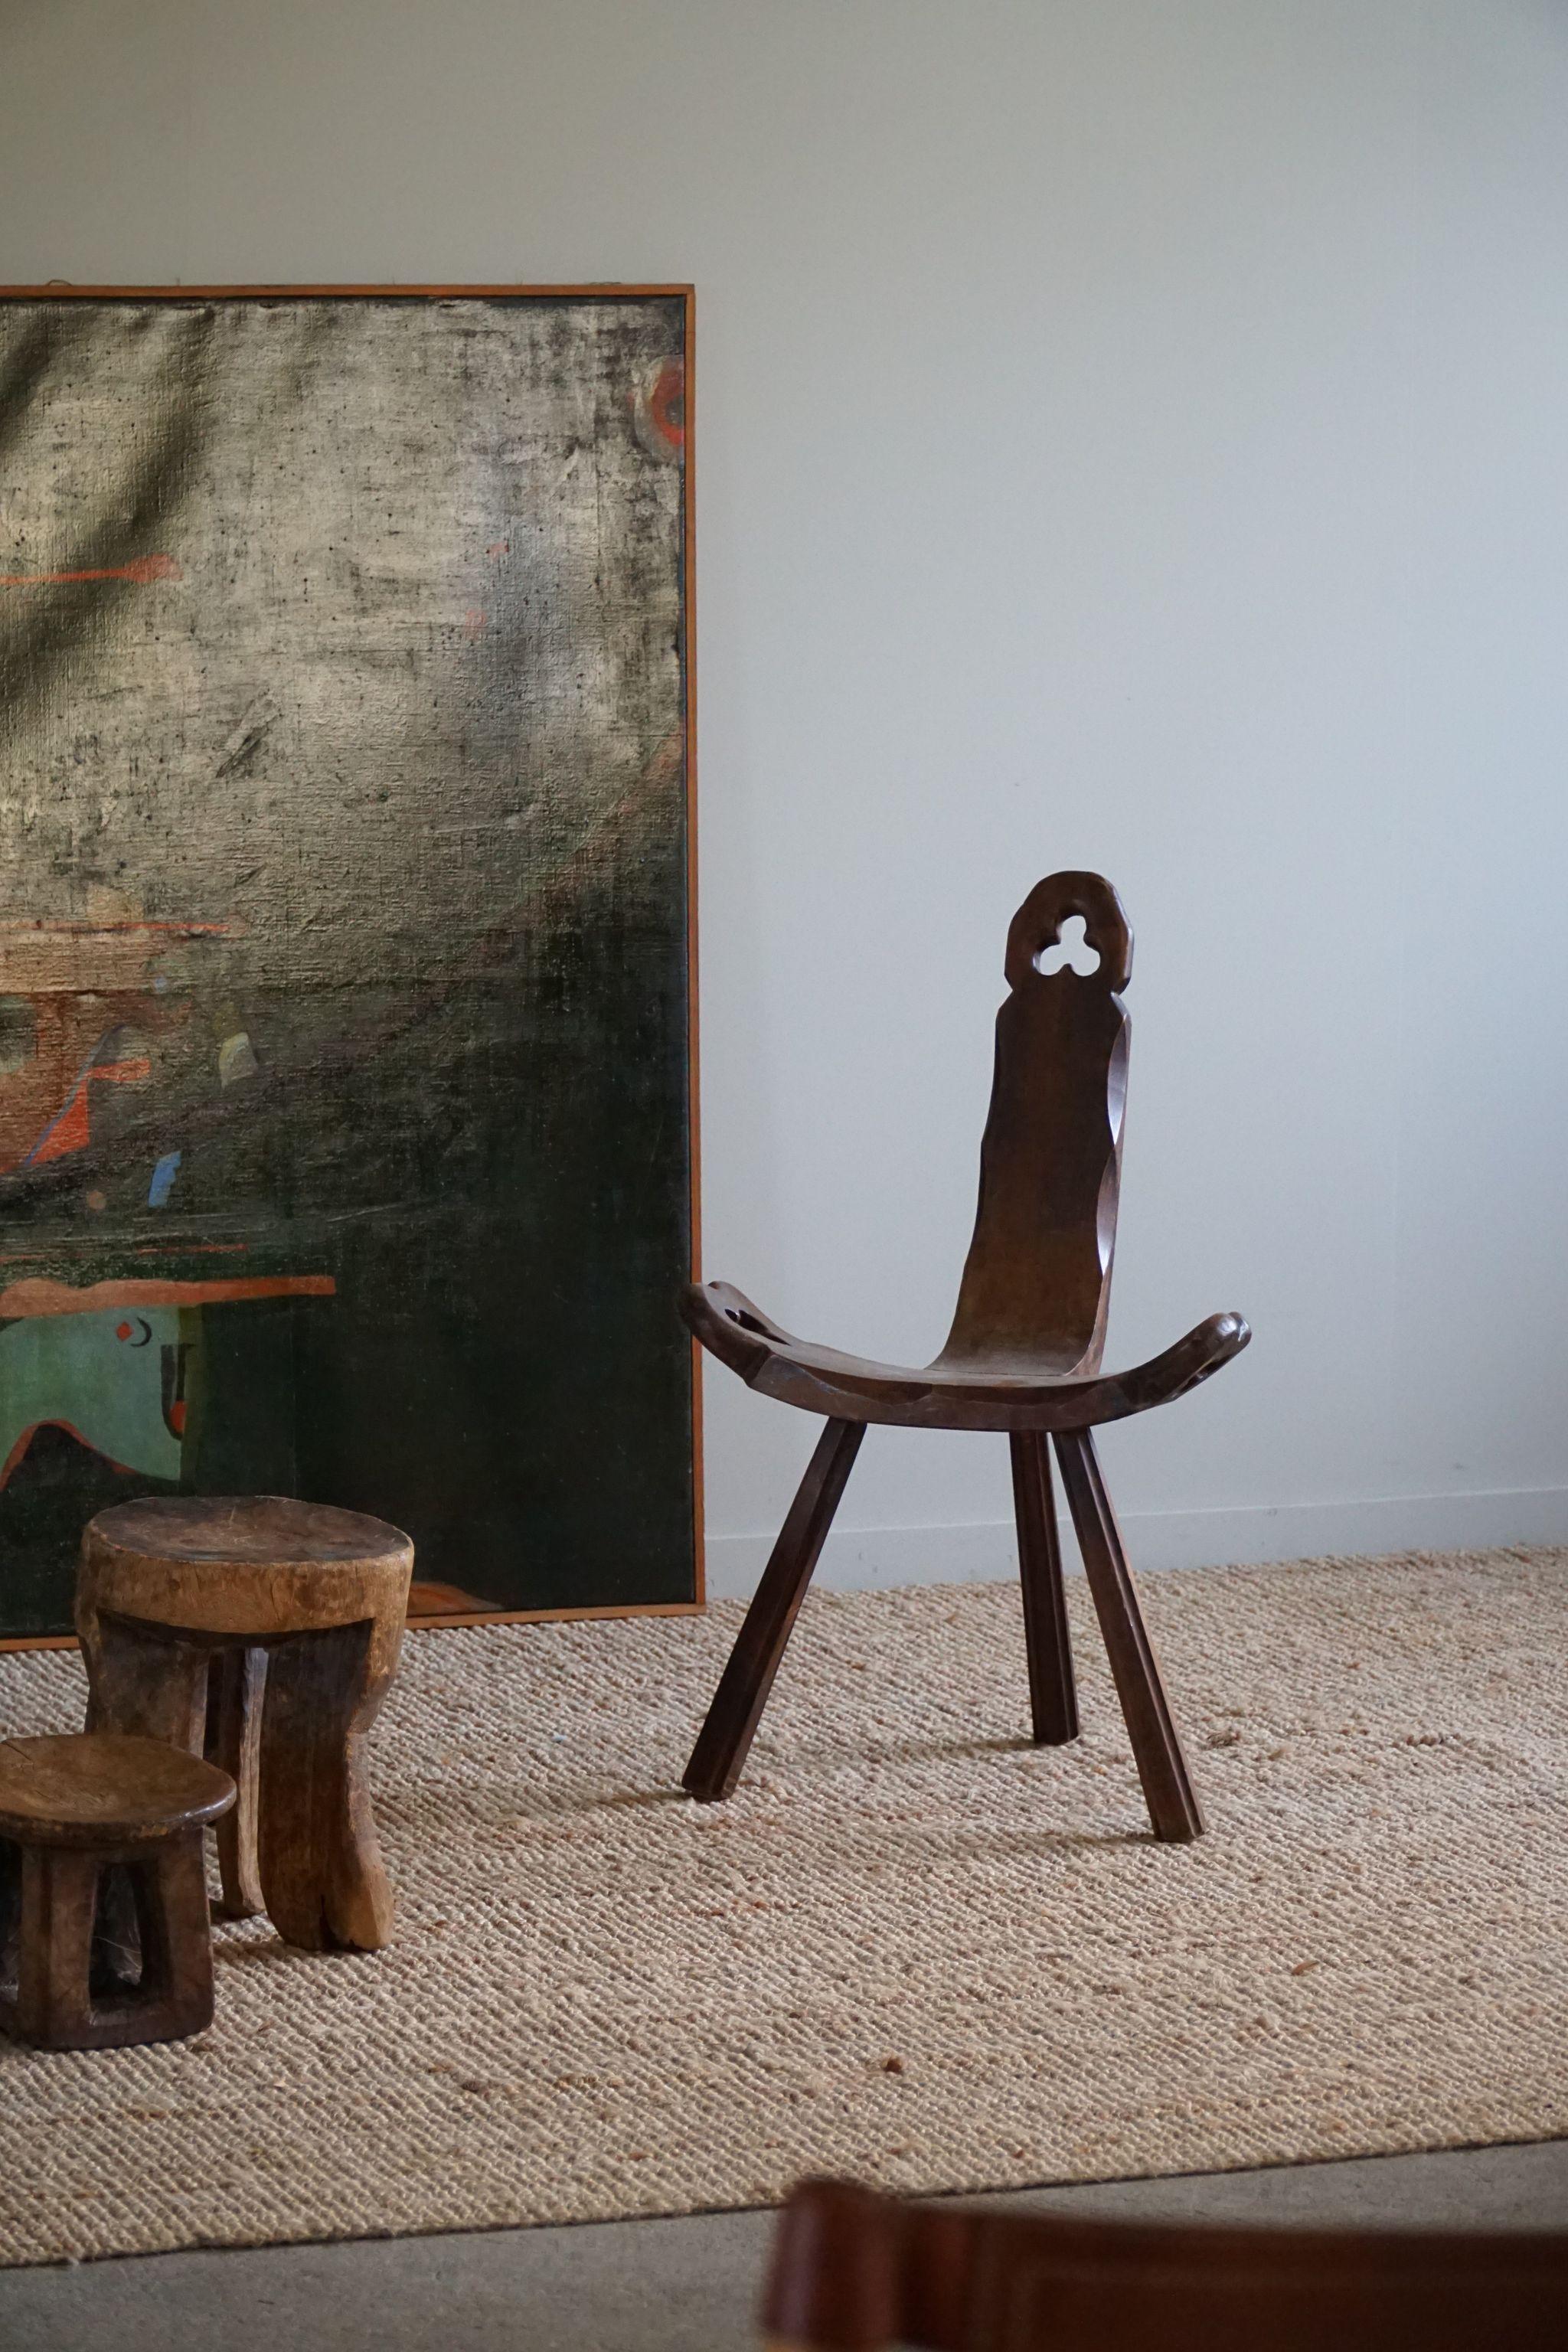 Sculptural wooden tripod chair, made in the early 20th century in France. 

A beautiful brutalist object with a fine patina, well suited for the modern interior. Such as a Scandinavian, Japandi, Antique or Art Deco home decor. 

